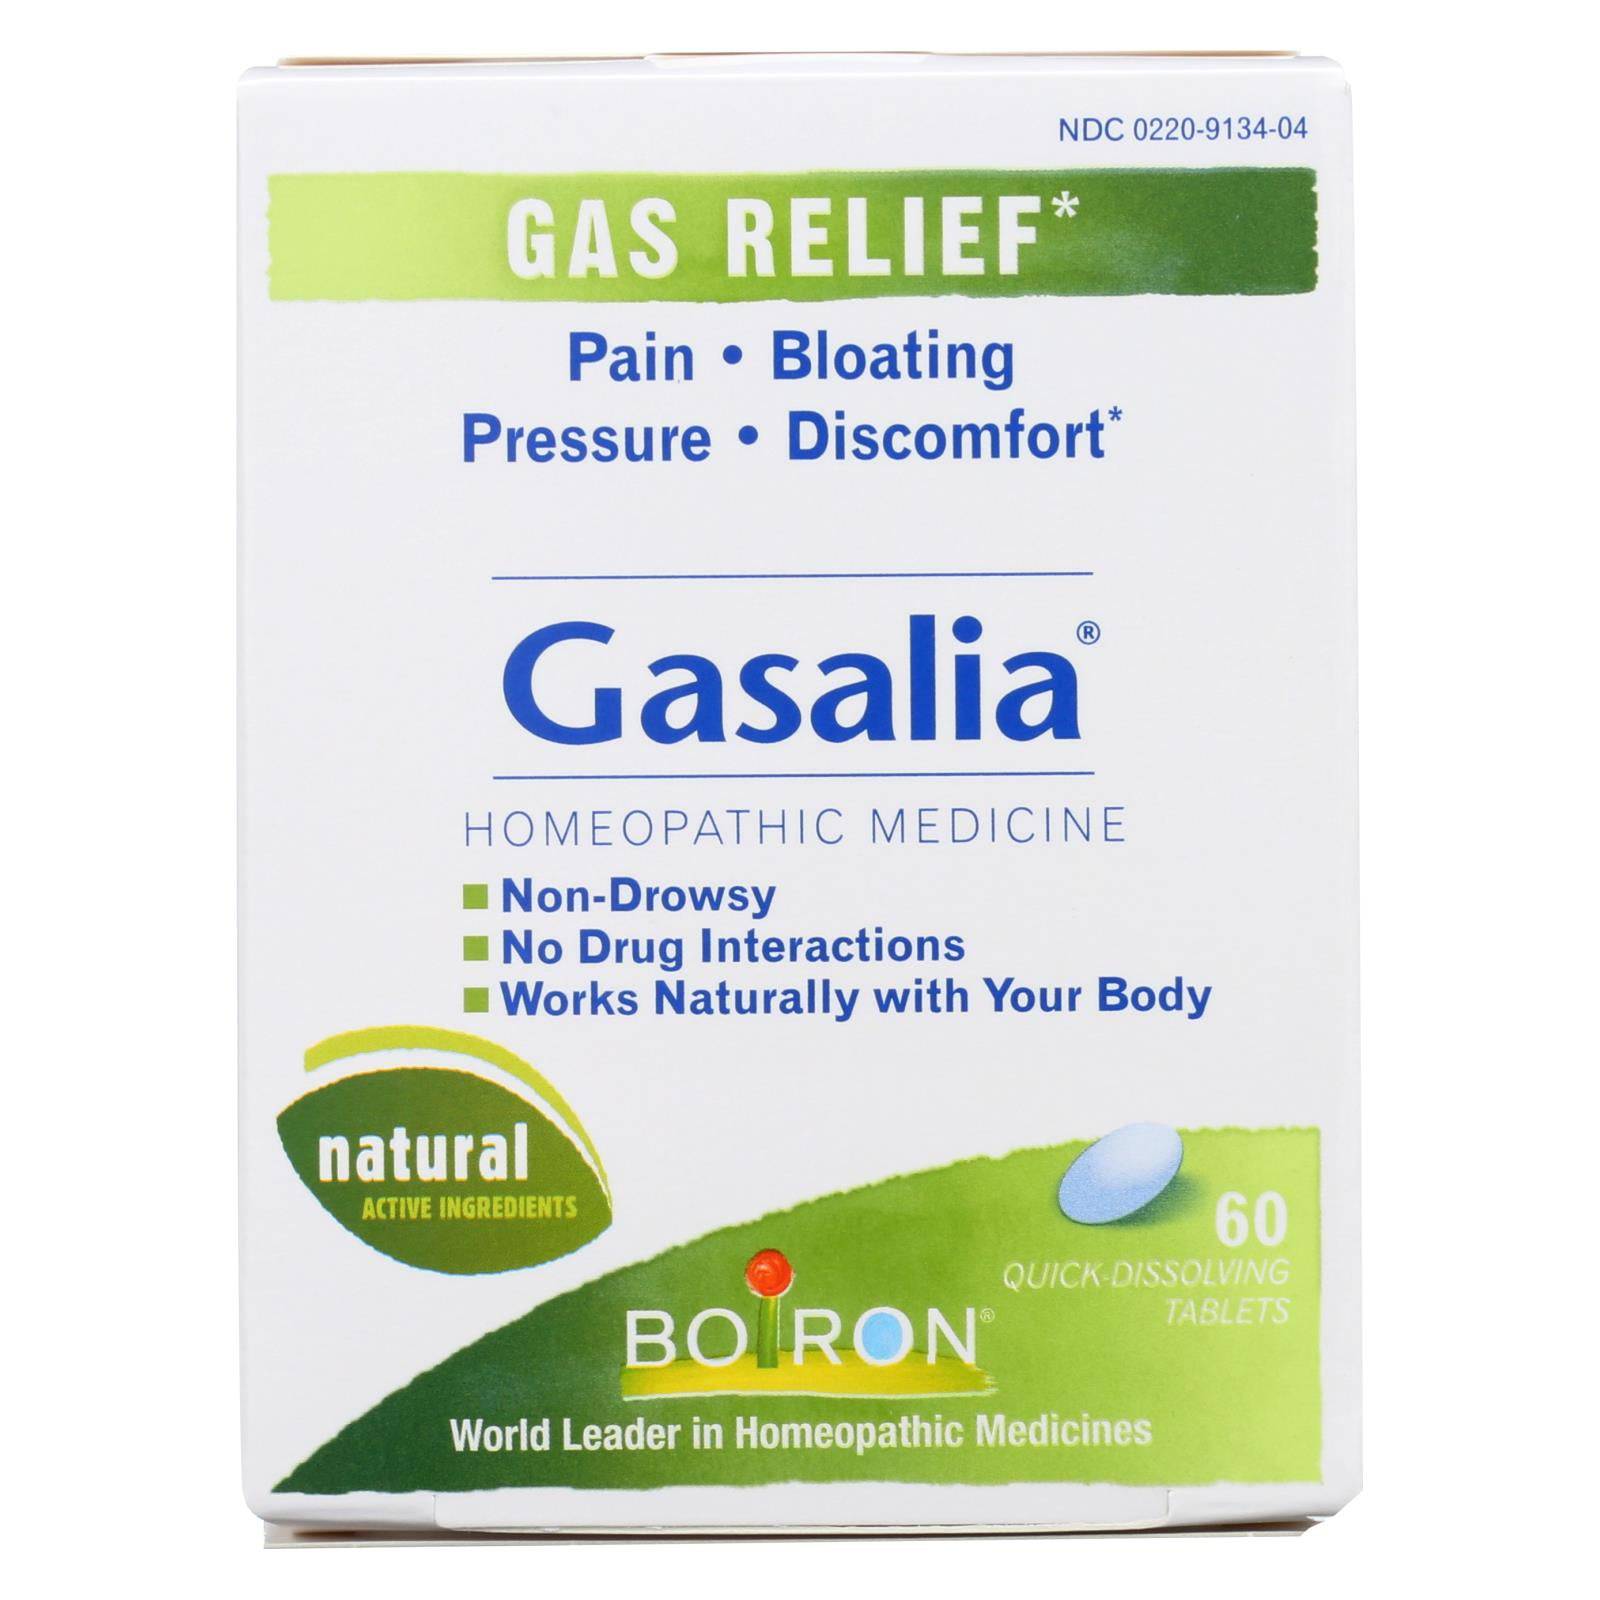 Buy Boiron - Gasalia - 60 Tablets  at OnlyNaturals.us